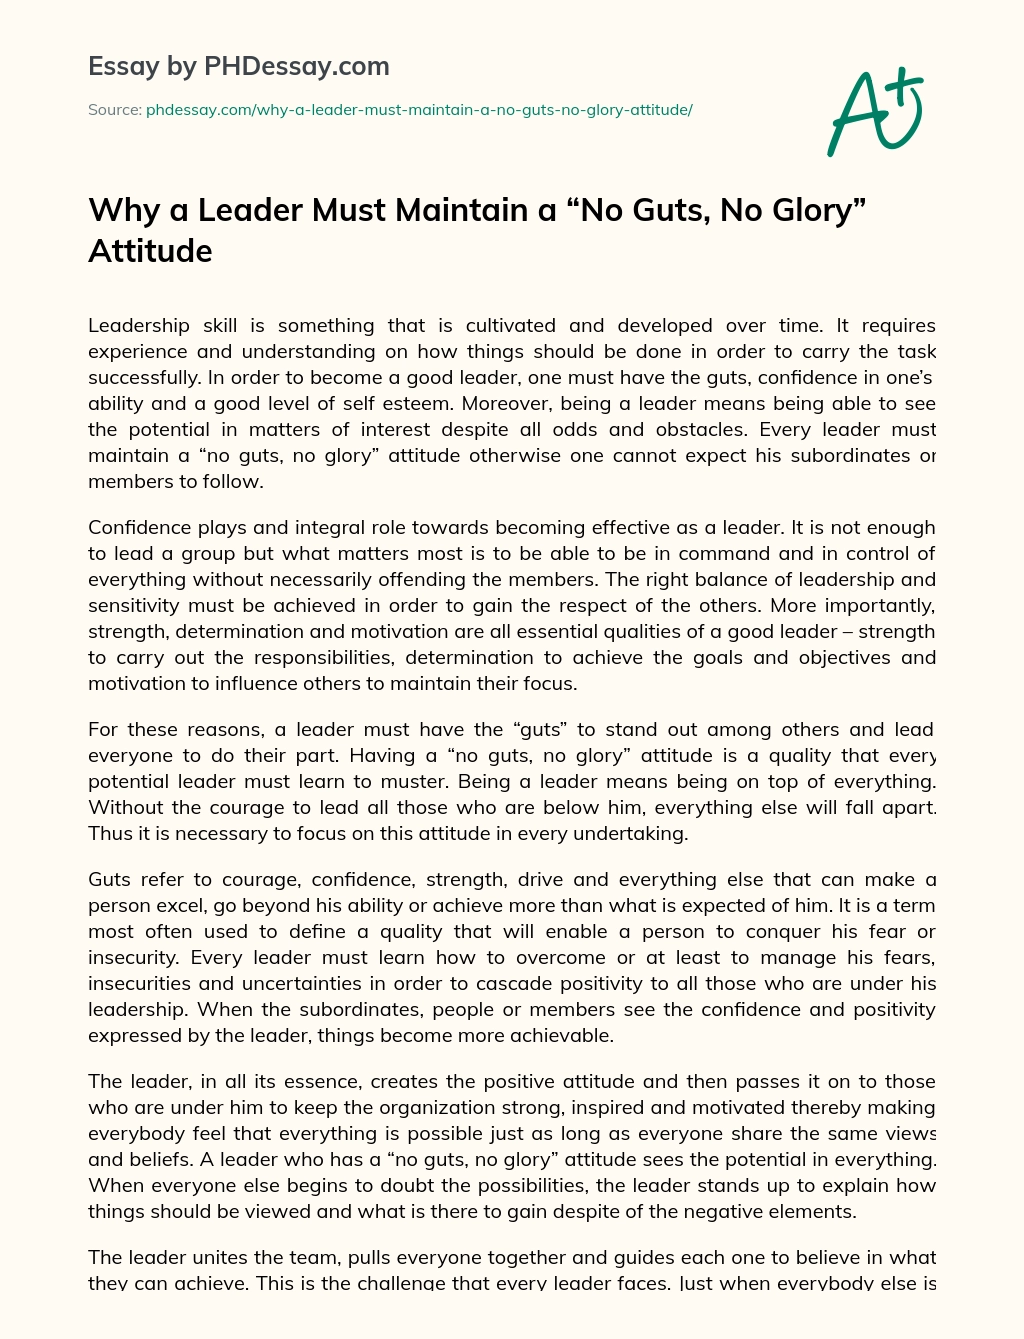 Why a Leader Must Maintain a “No Guts, No Glory” Attitude essay